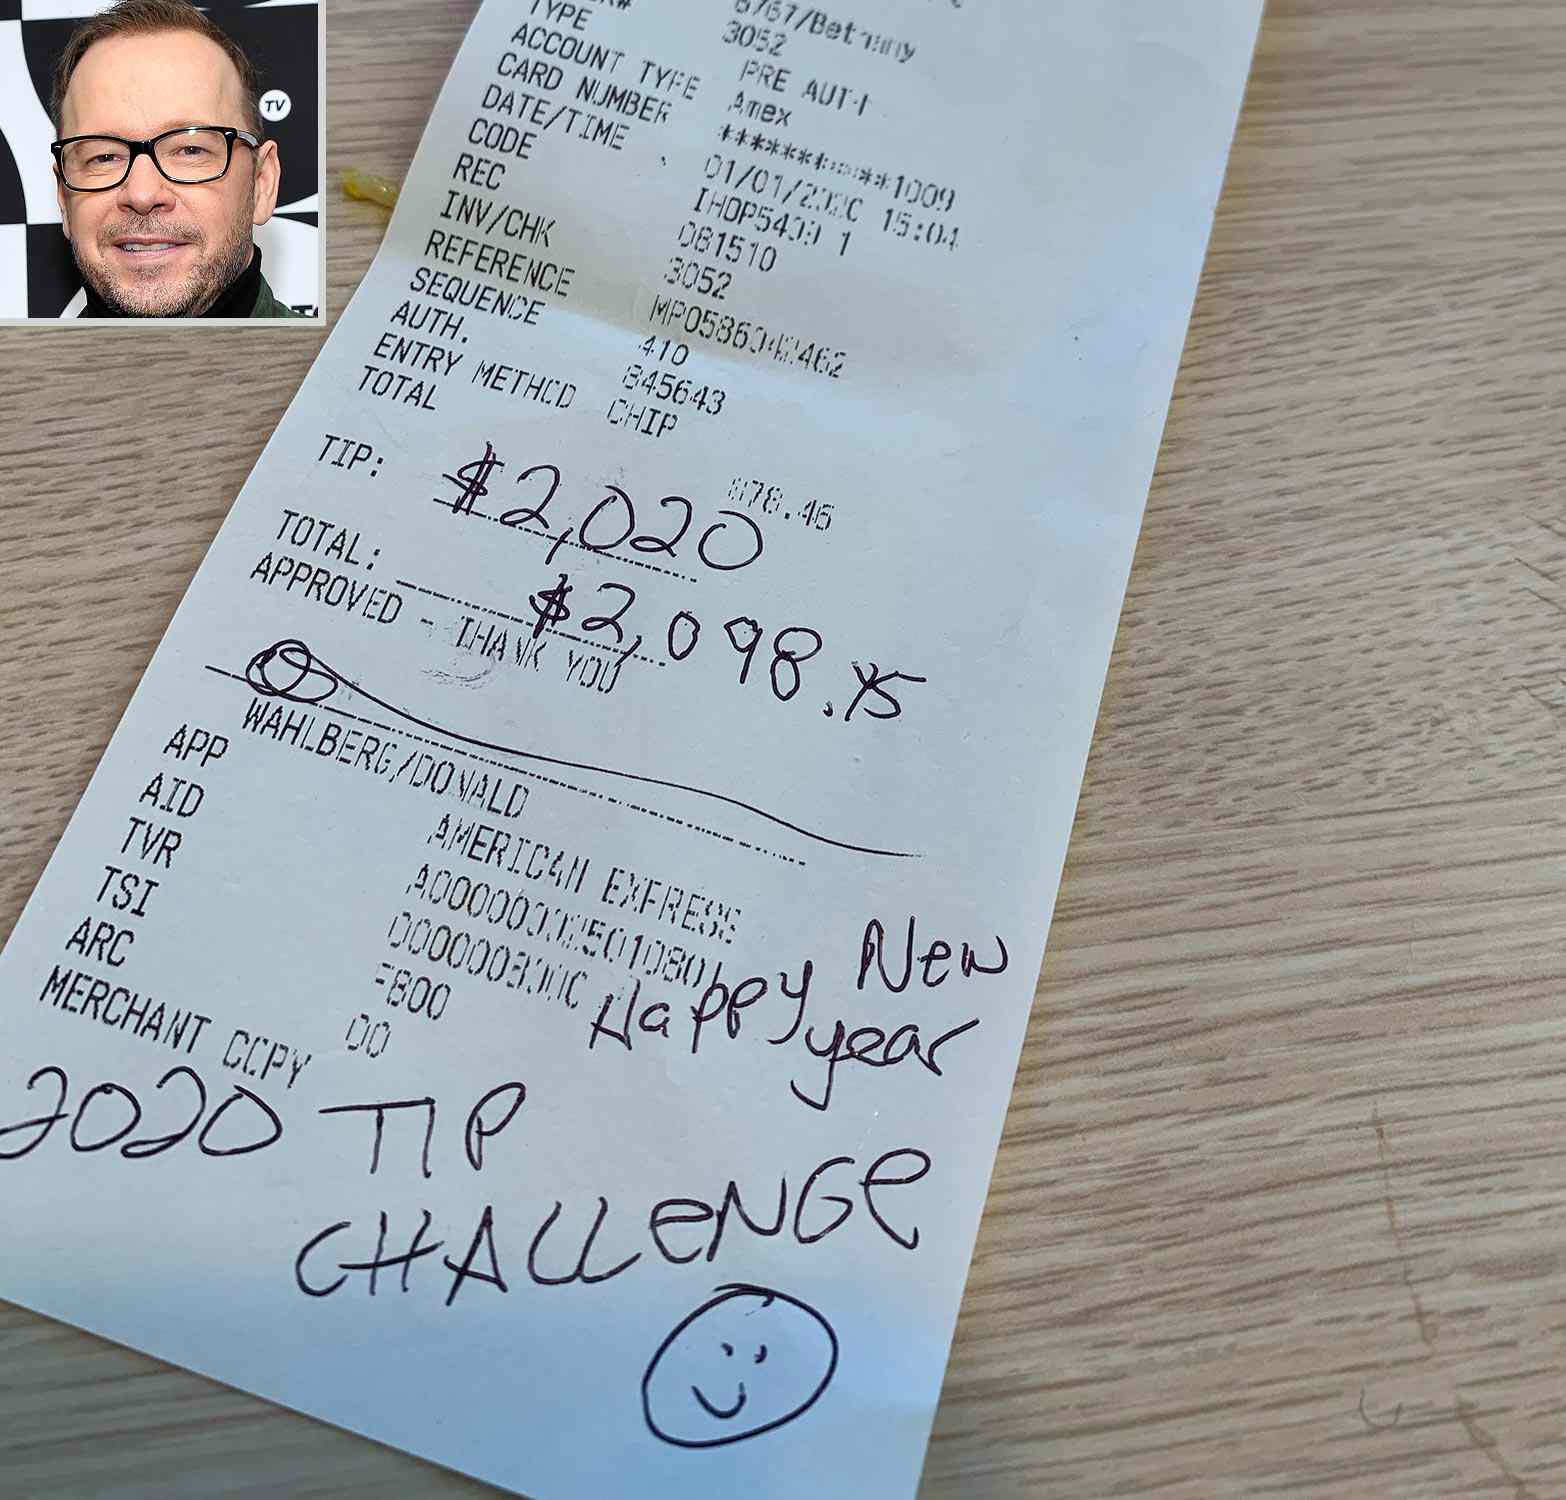 Donnie Wahlberg $2K Tipping